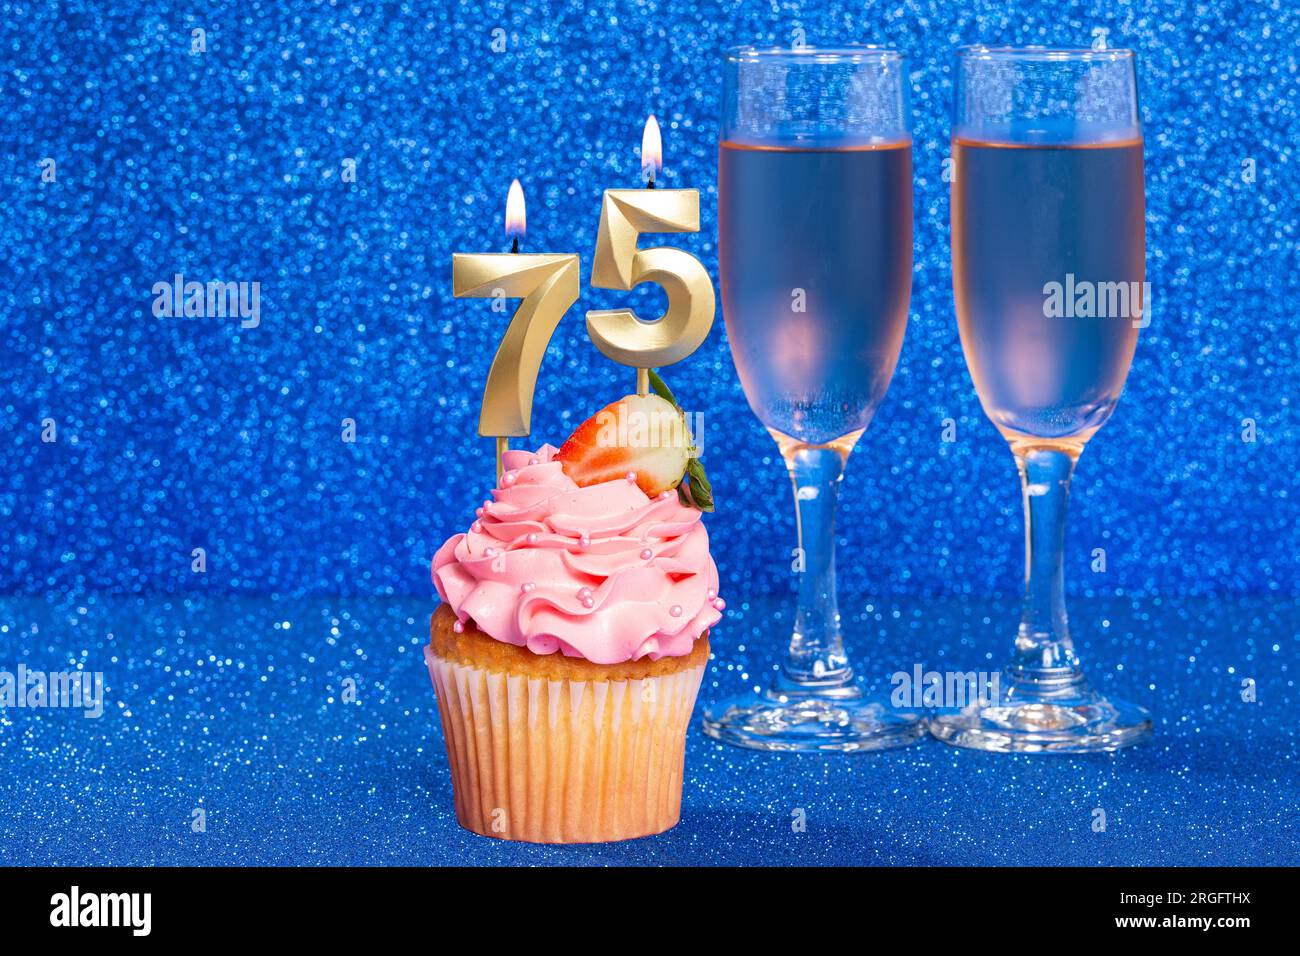 Cupcake With Number For Celebration Of Birthday Or Anniversary; Number 75. Stock Photo